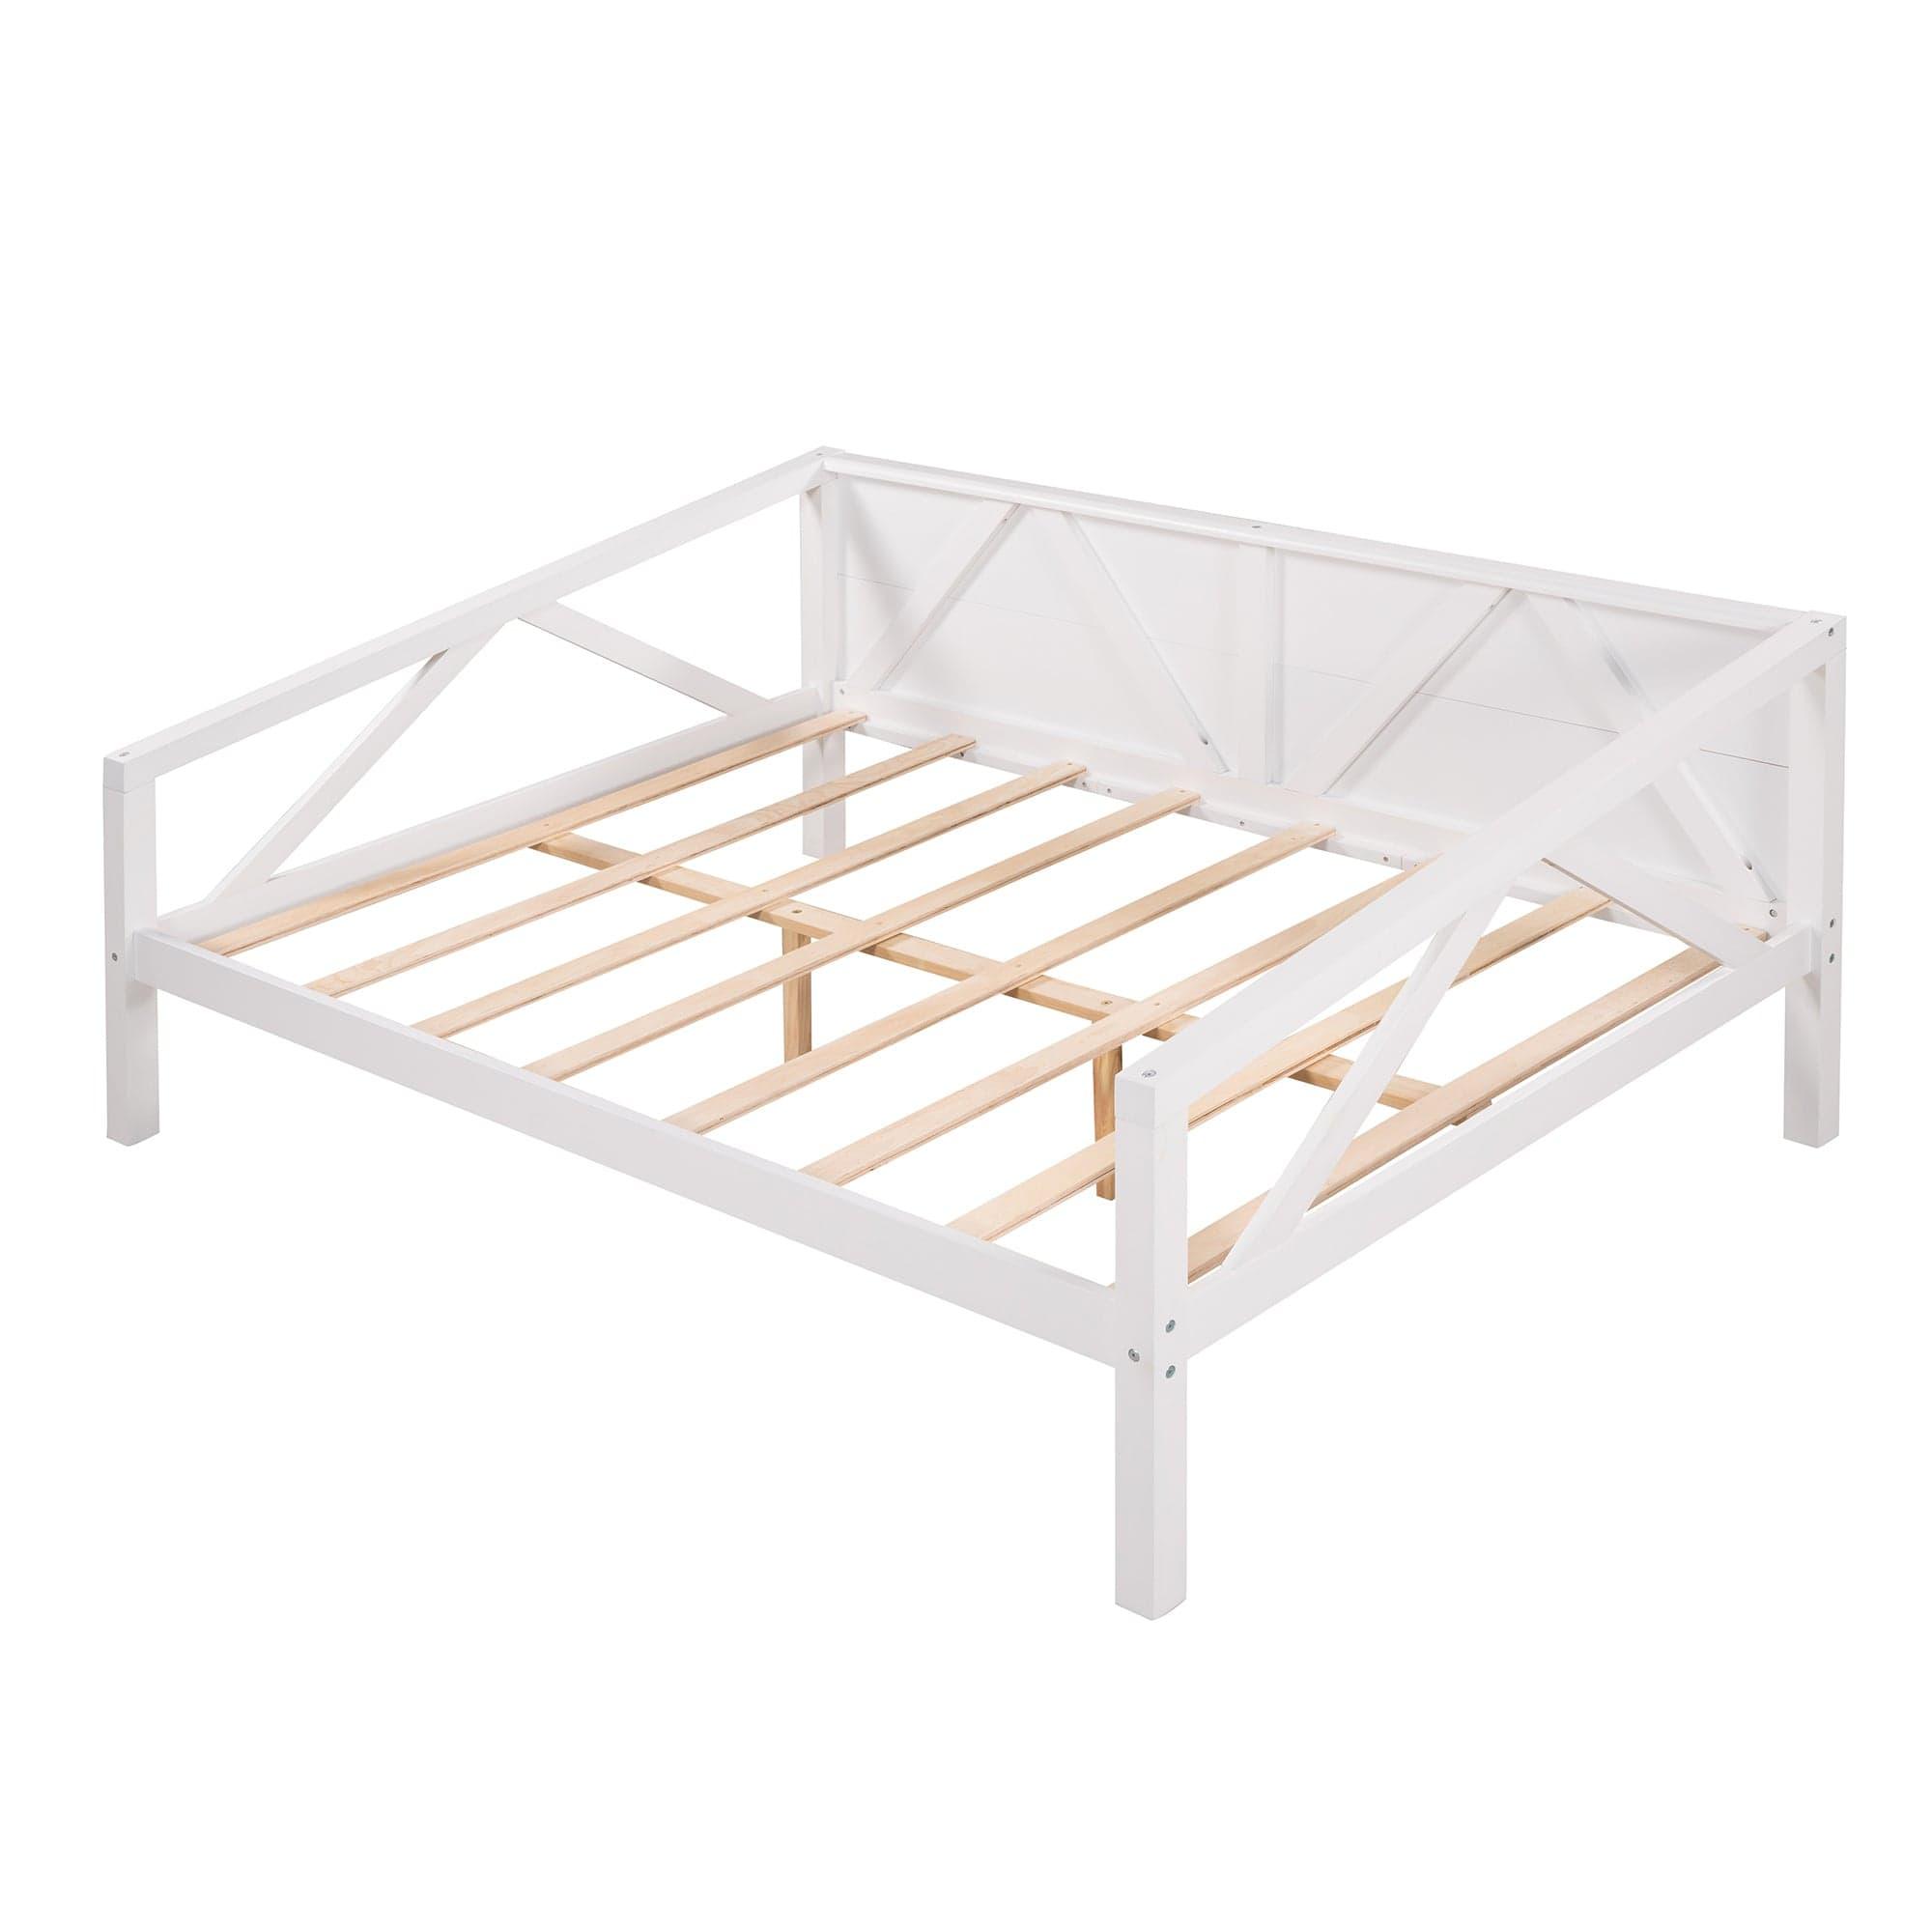 Shop Full size Daybed, Wood Slat Support, White Mademoiselle Home Decor